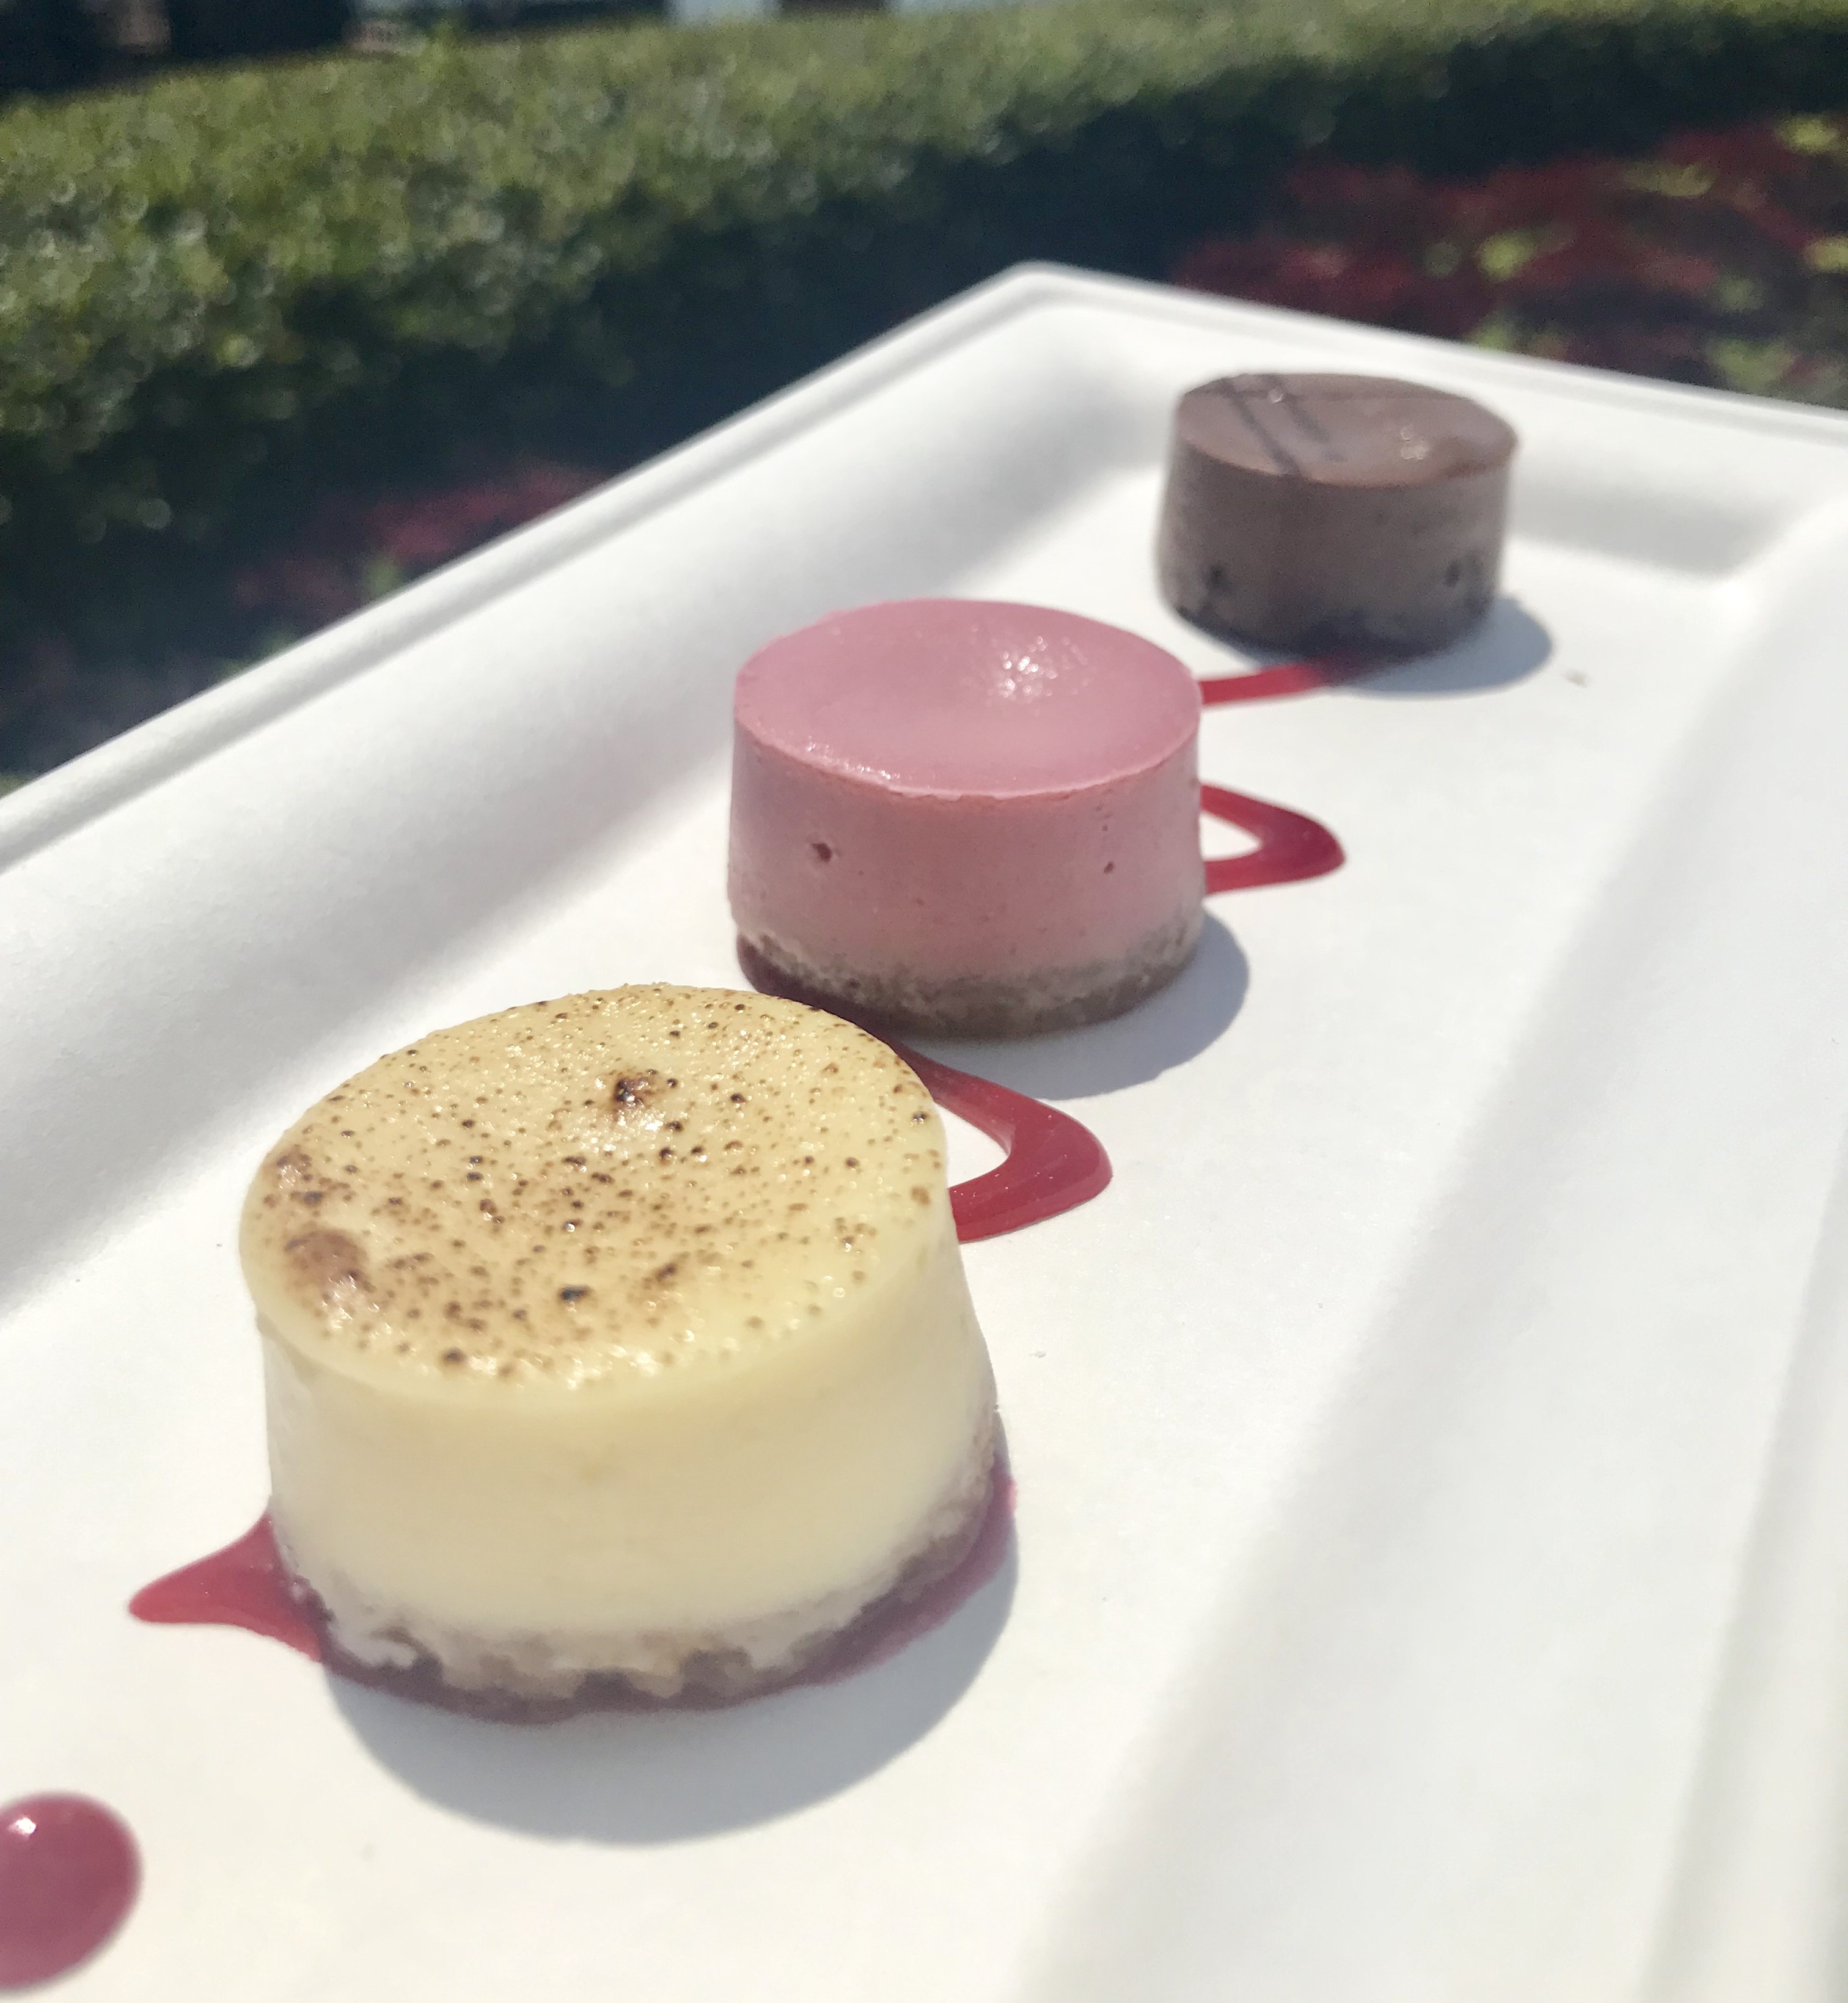 Cheesecake Trio from Sparkling Sips booth